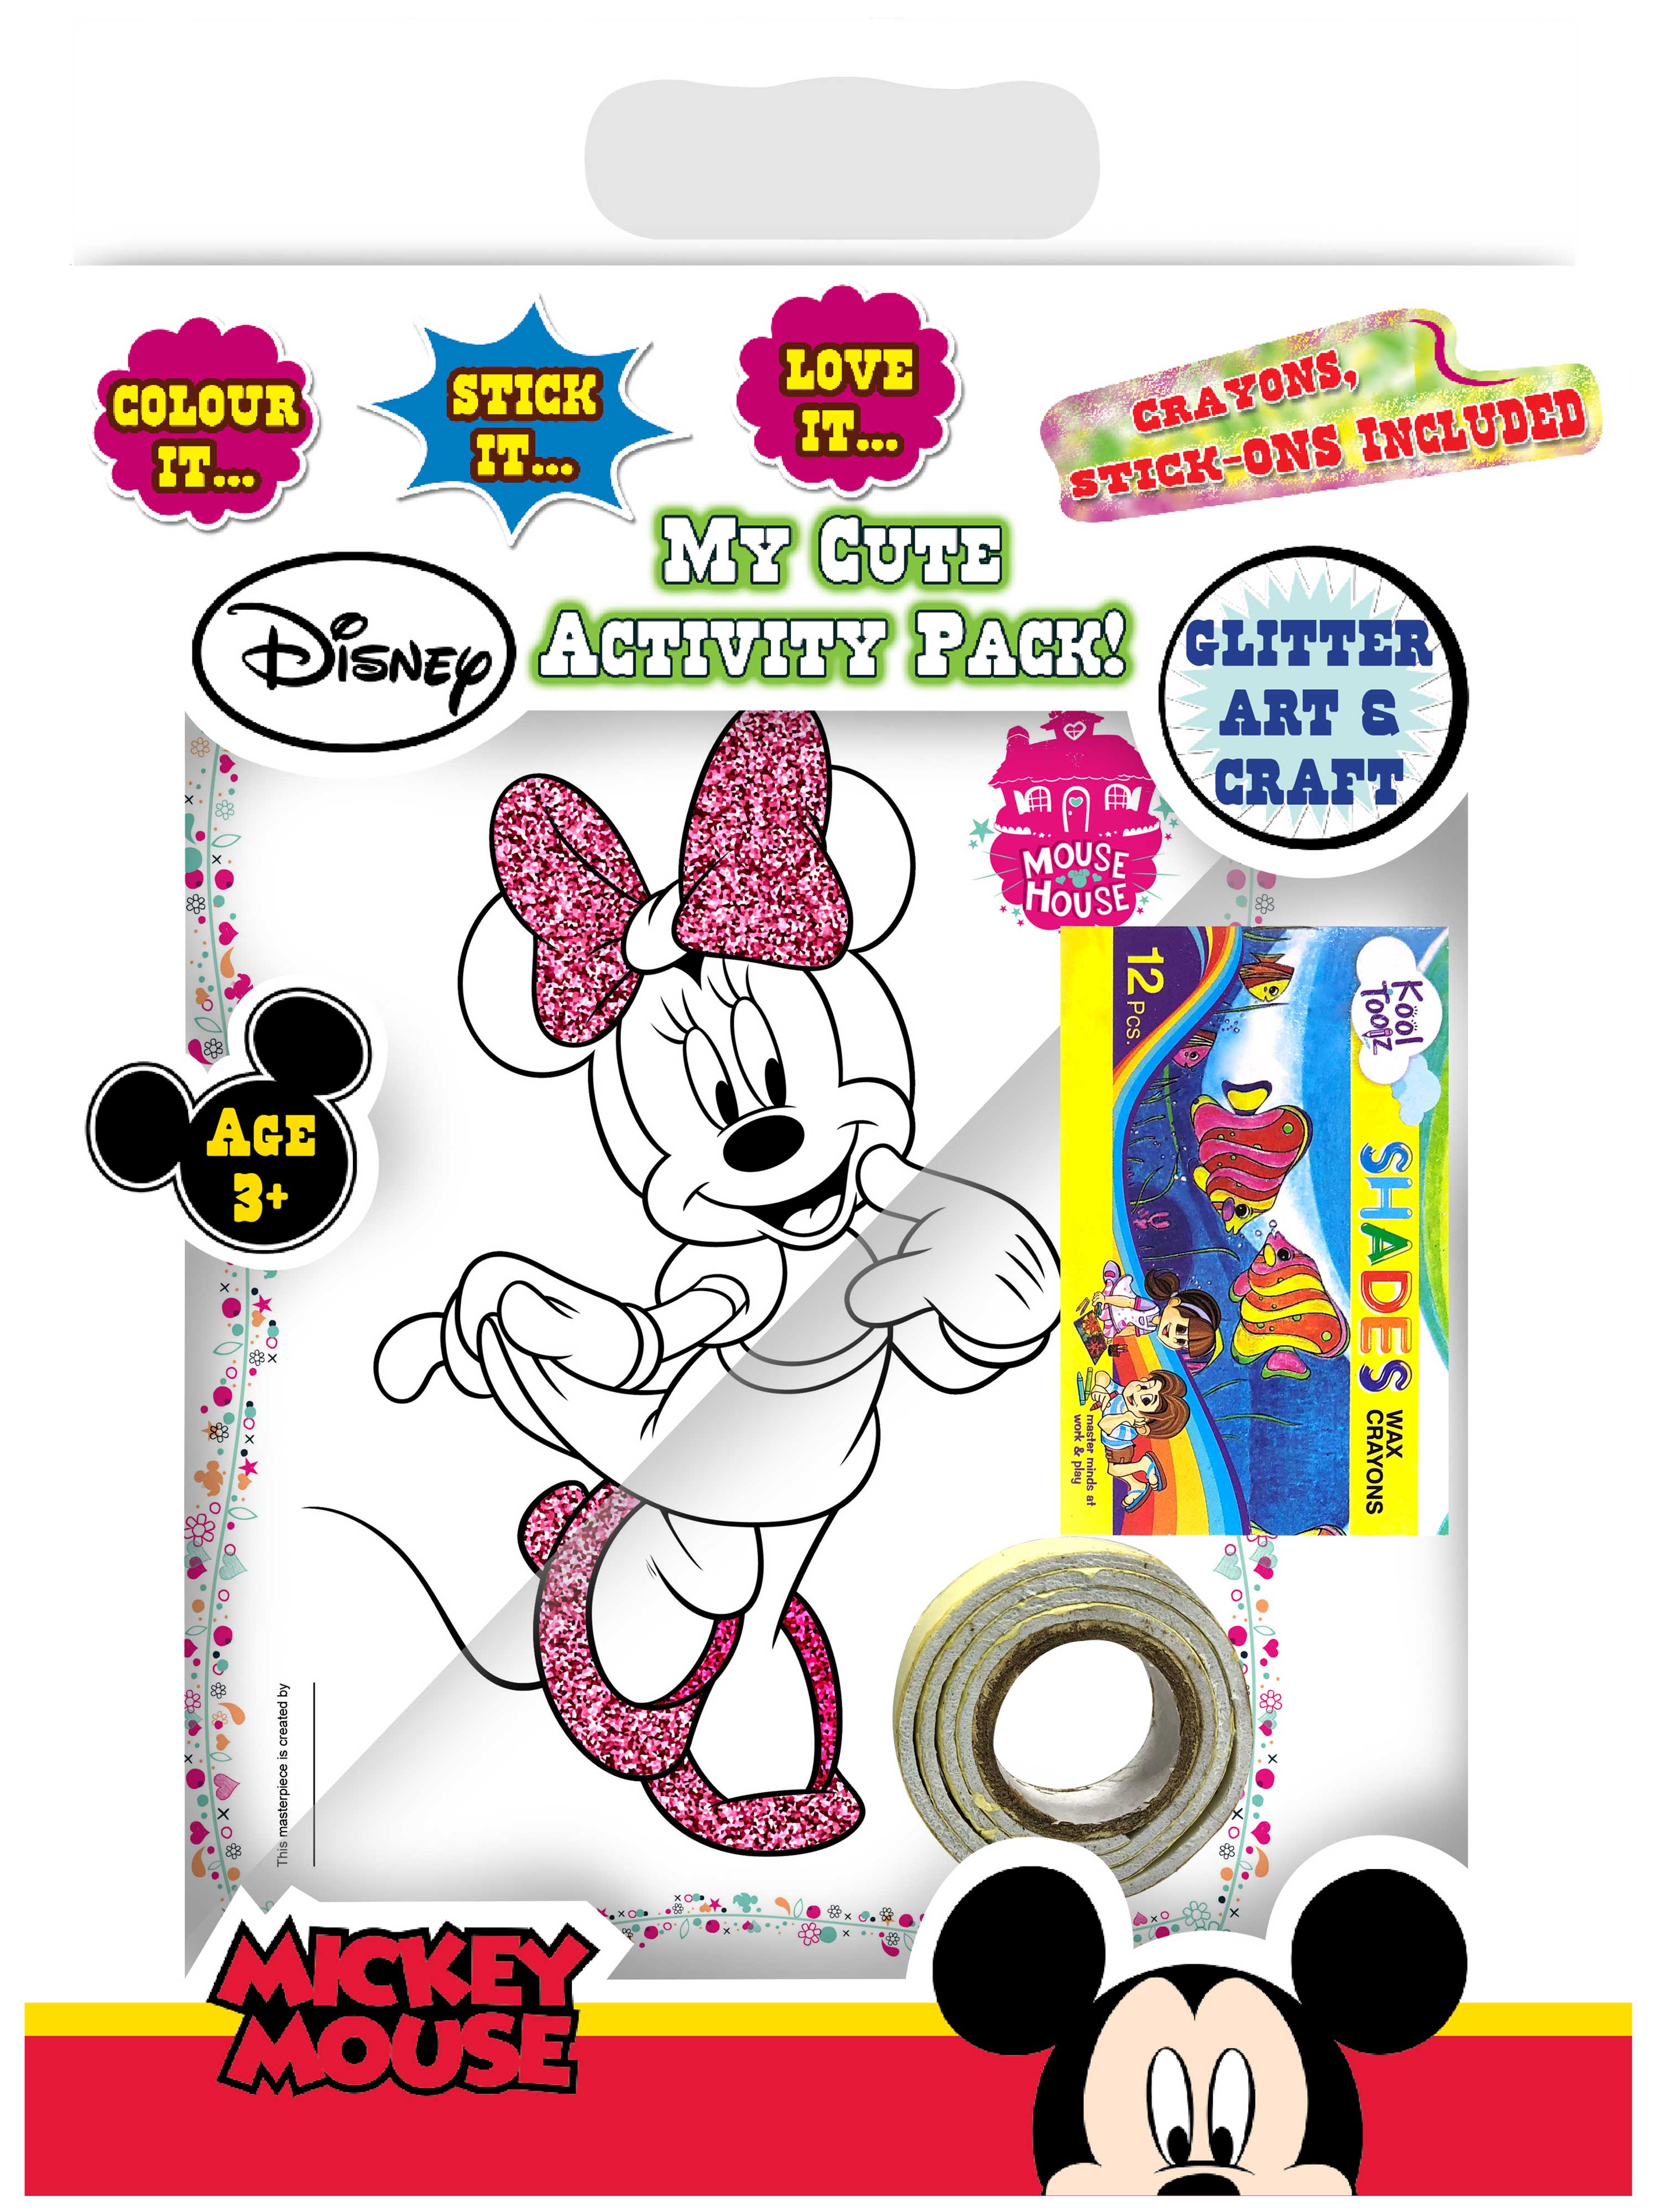 My Cute Activity Pack! Micky Mouse Glitter